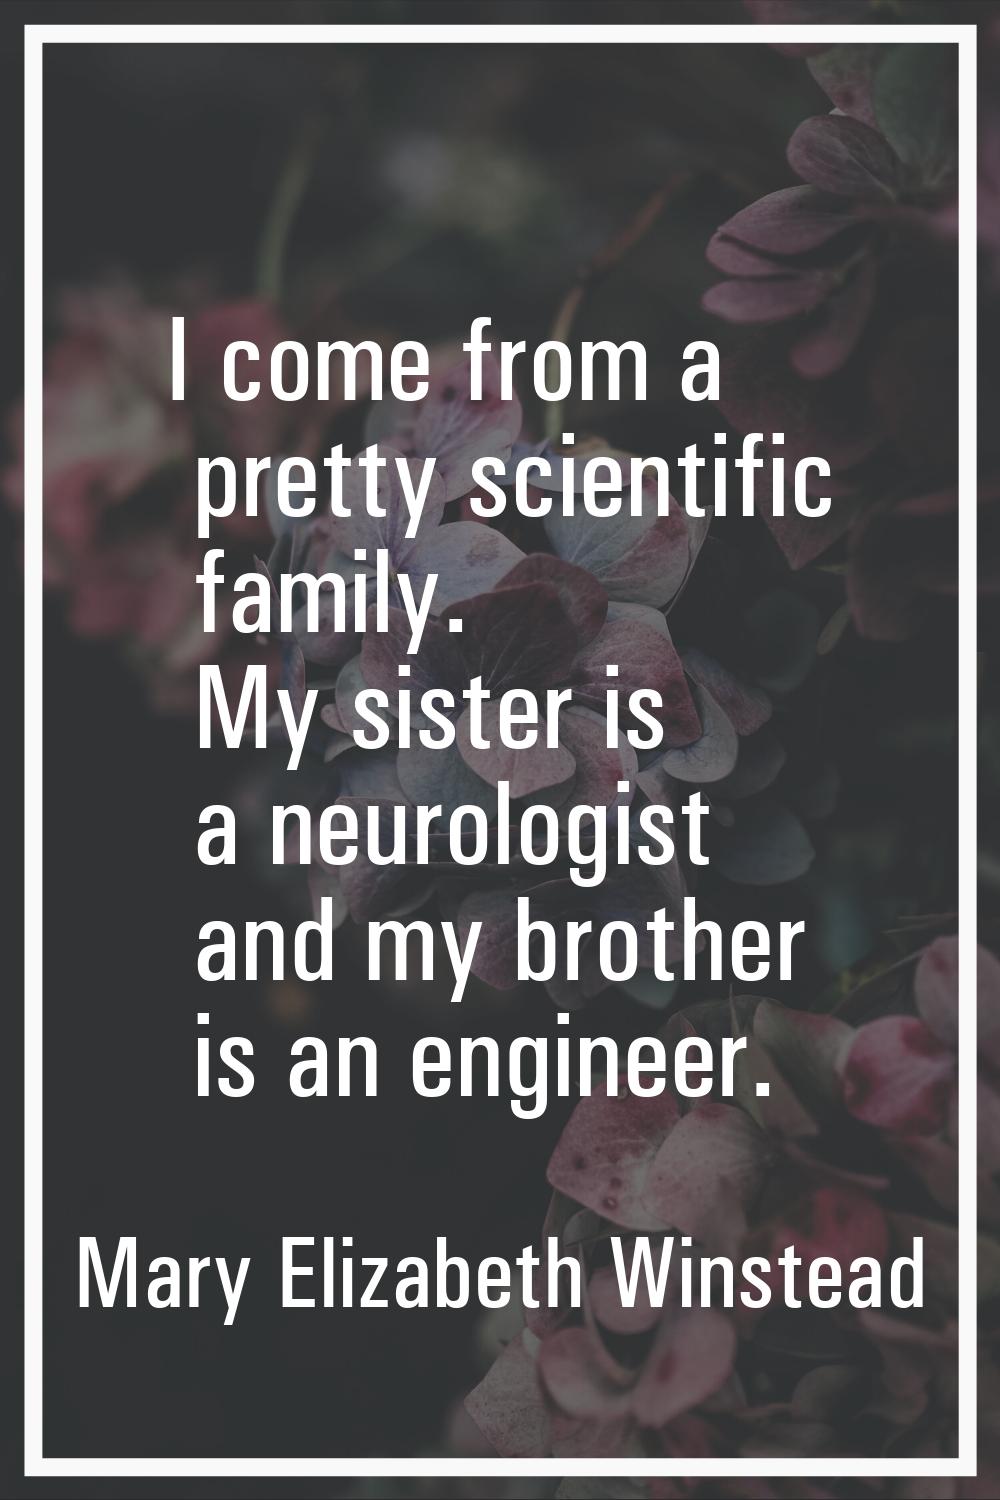 I come from a pretty scientific family. My sister is a neurologist and my brother is an engineer.